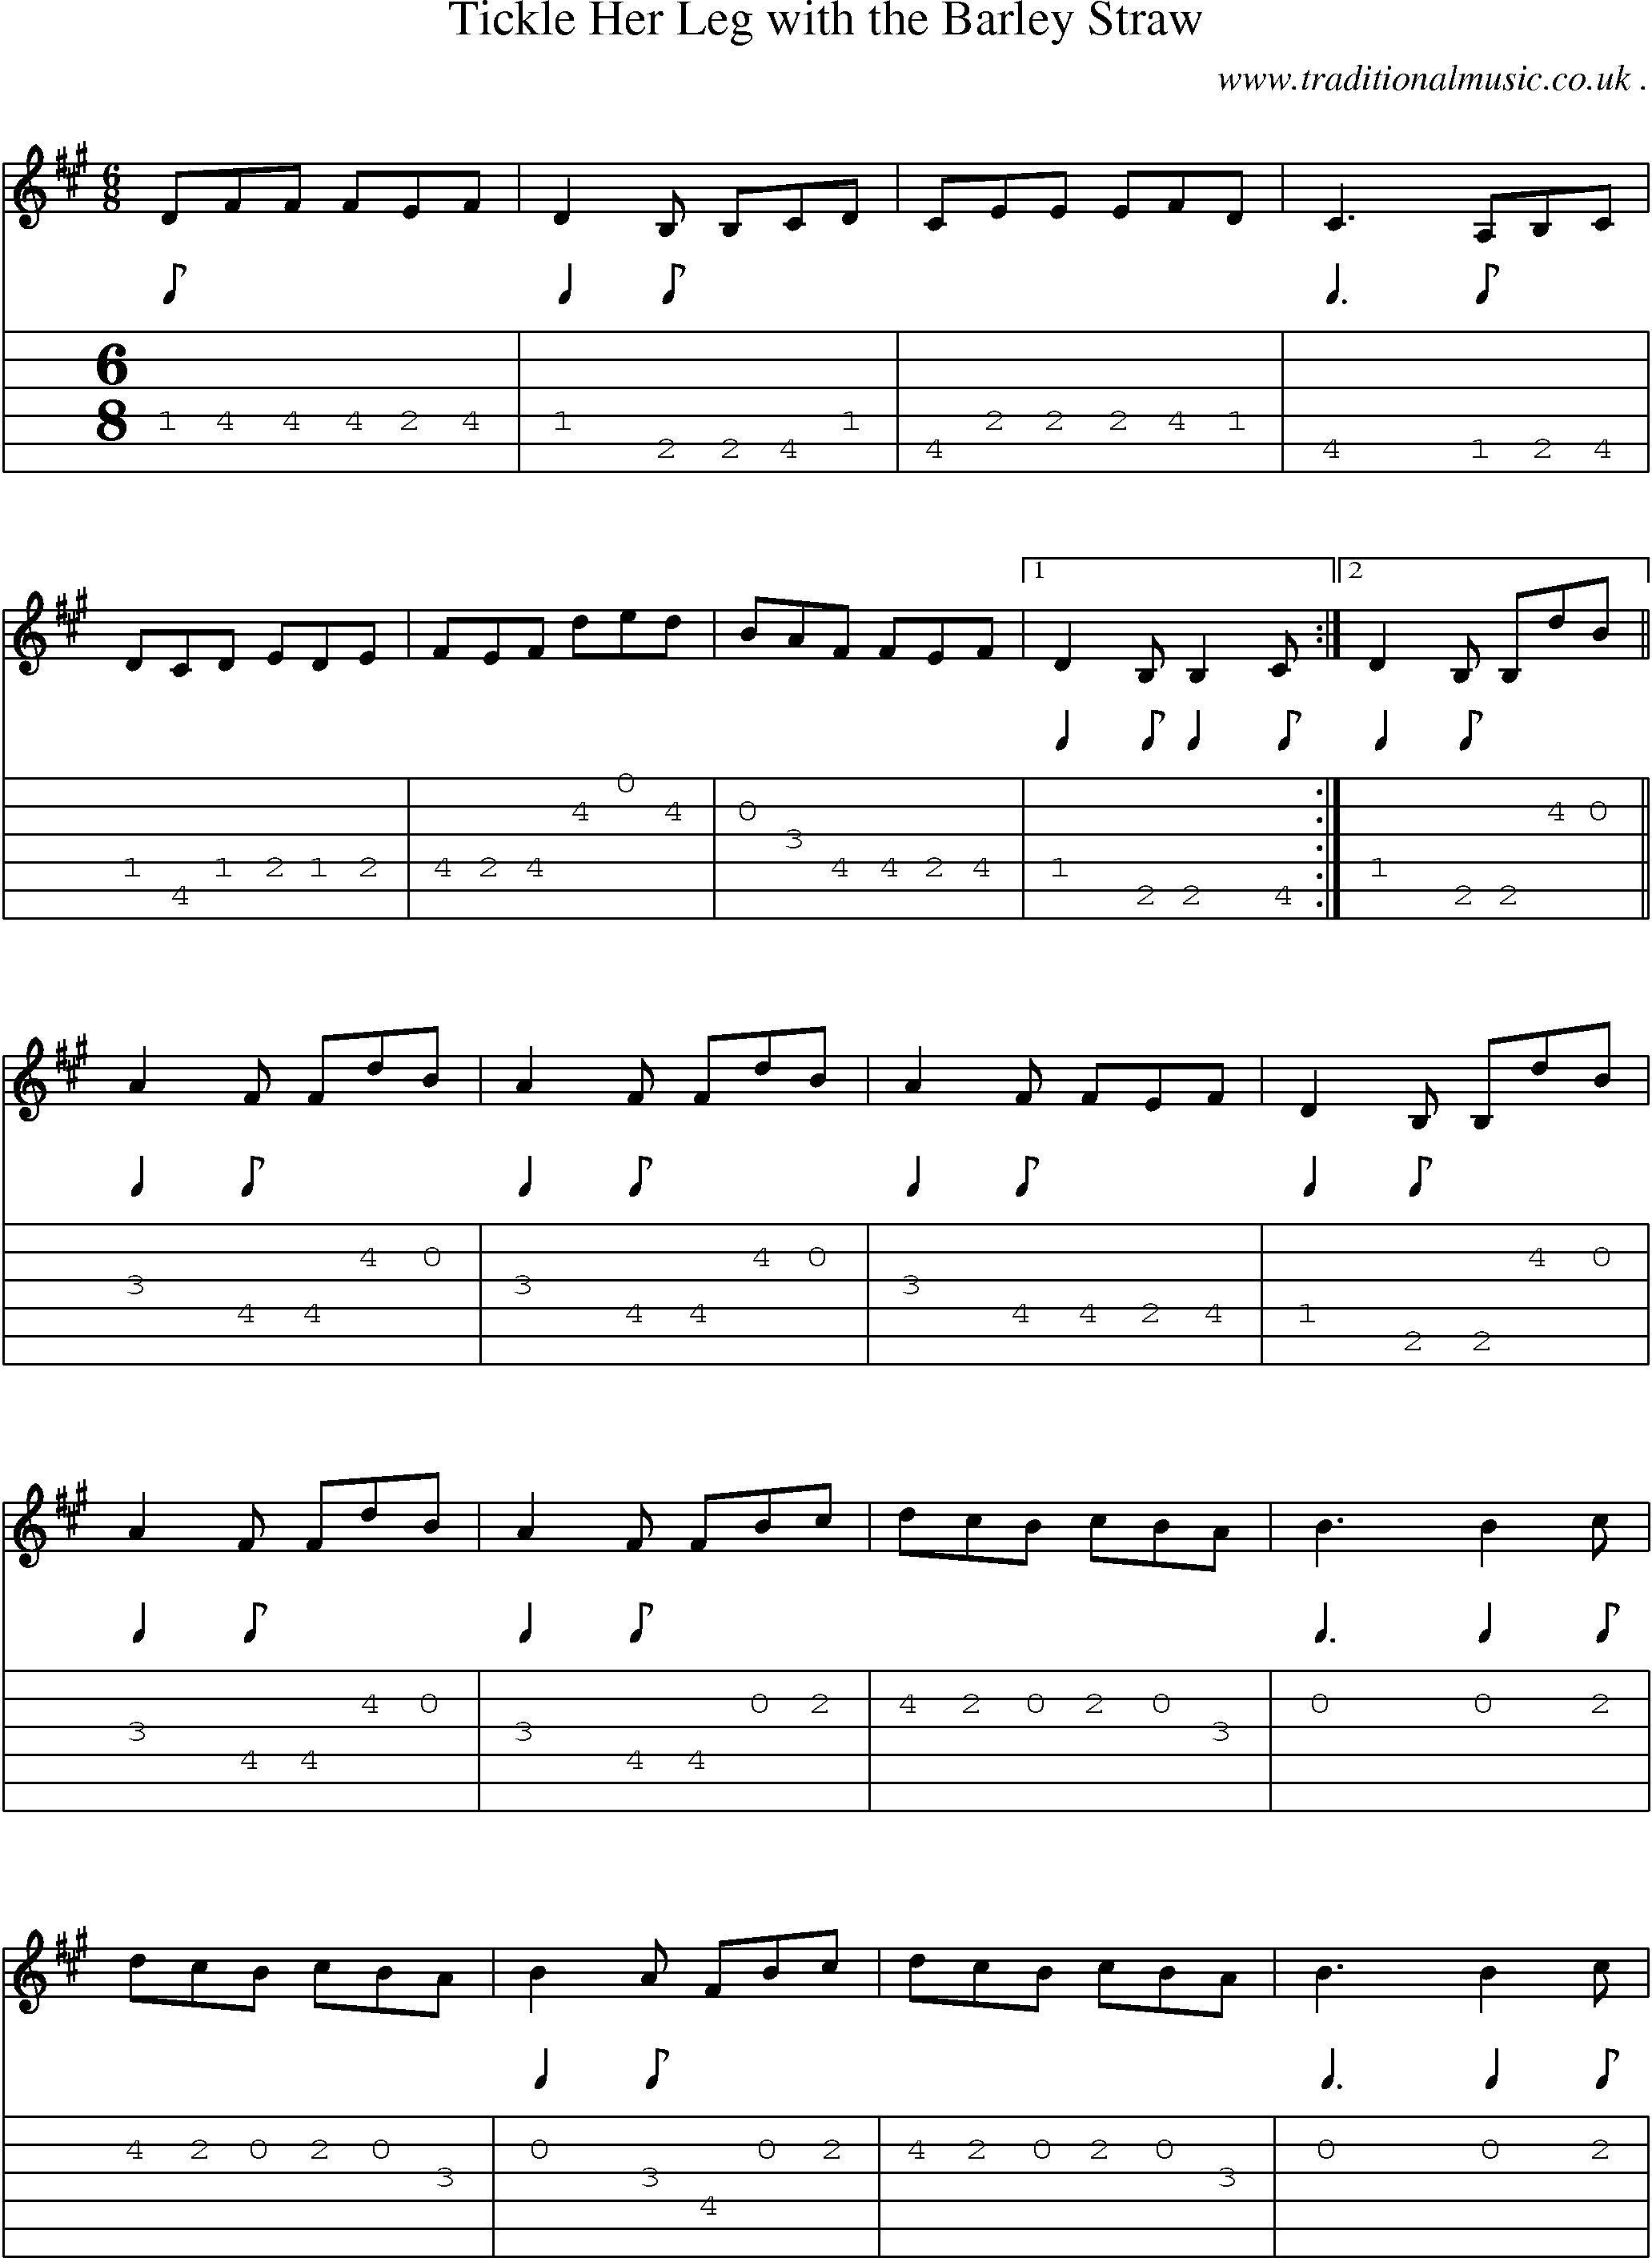 Sheet-Music and Guitar Tabs for Tickle Her Leg With The Barley Straw